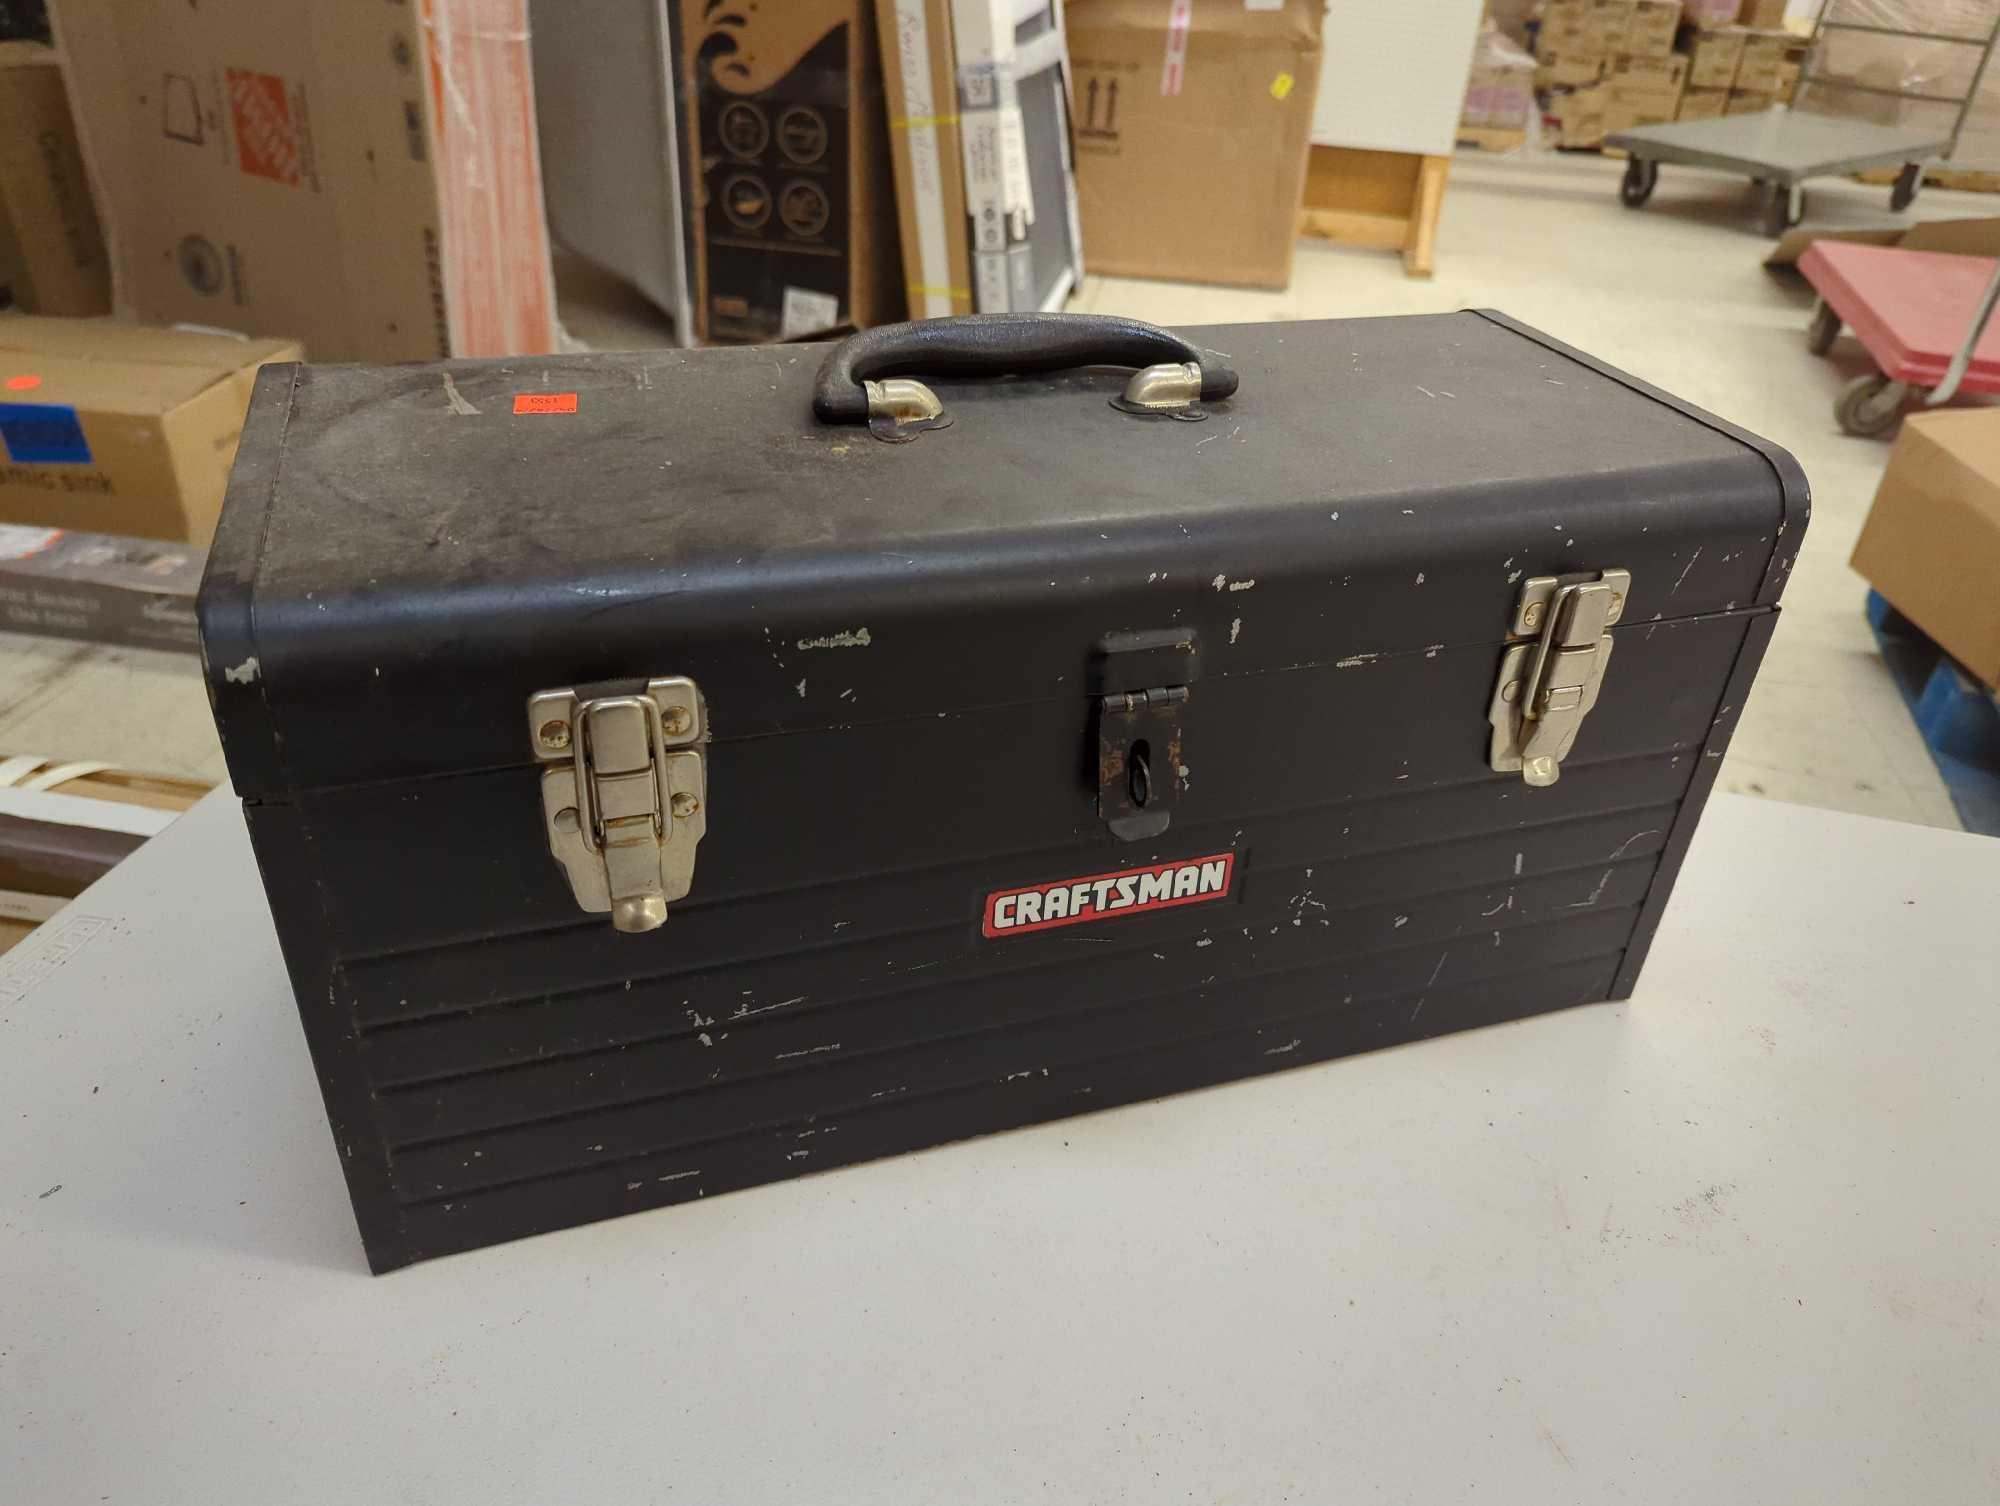 Craftsman Black metal toolbox and contents including various tools as pictured. Comes as is shown.